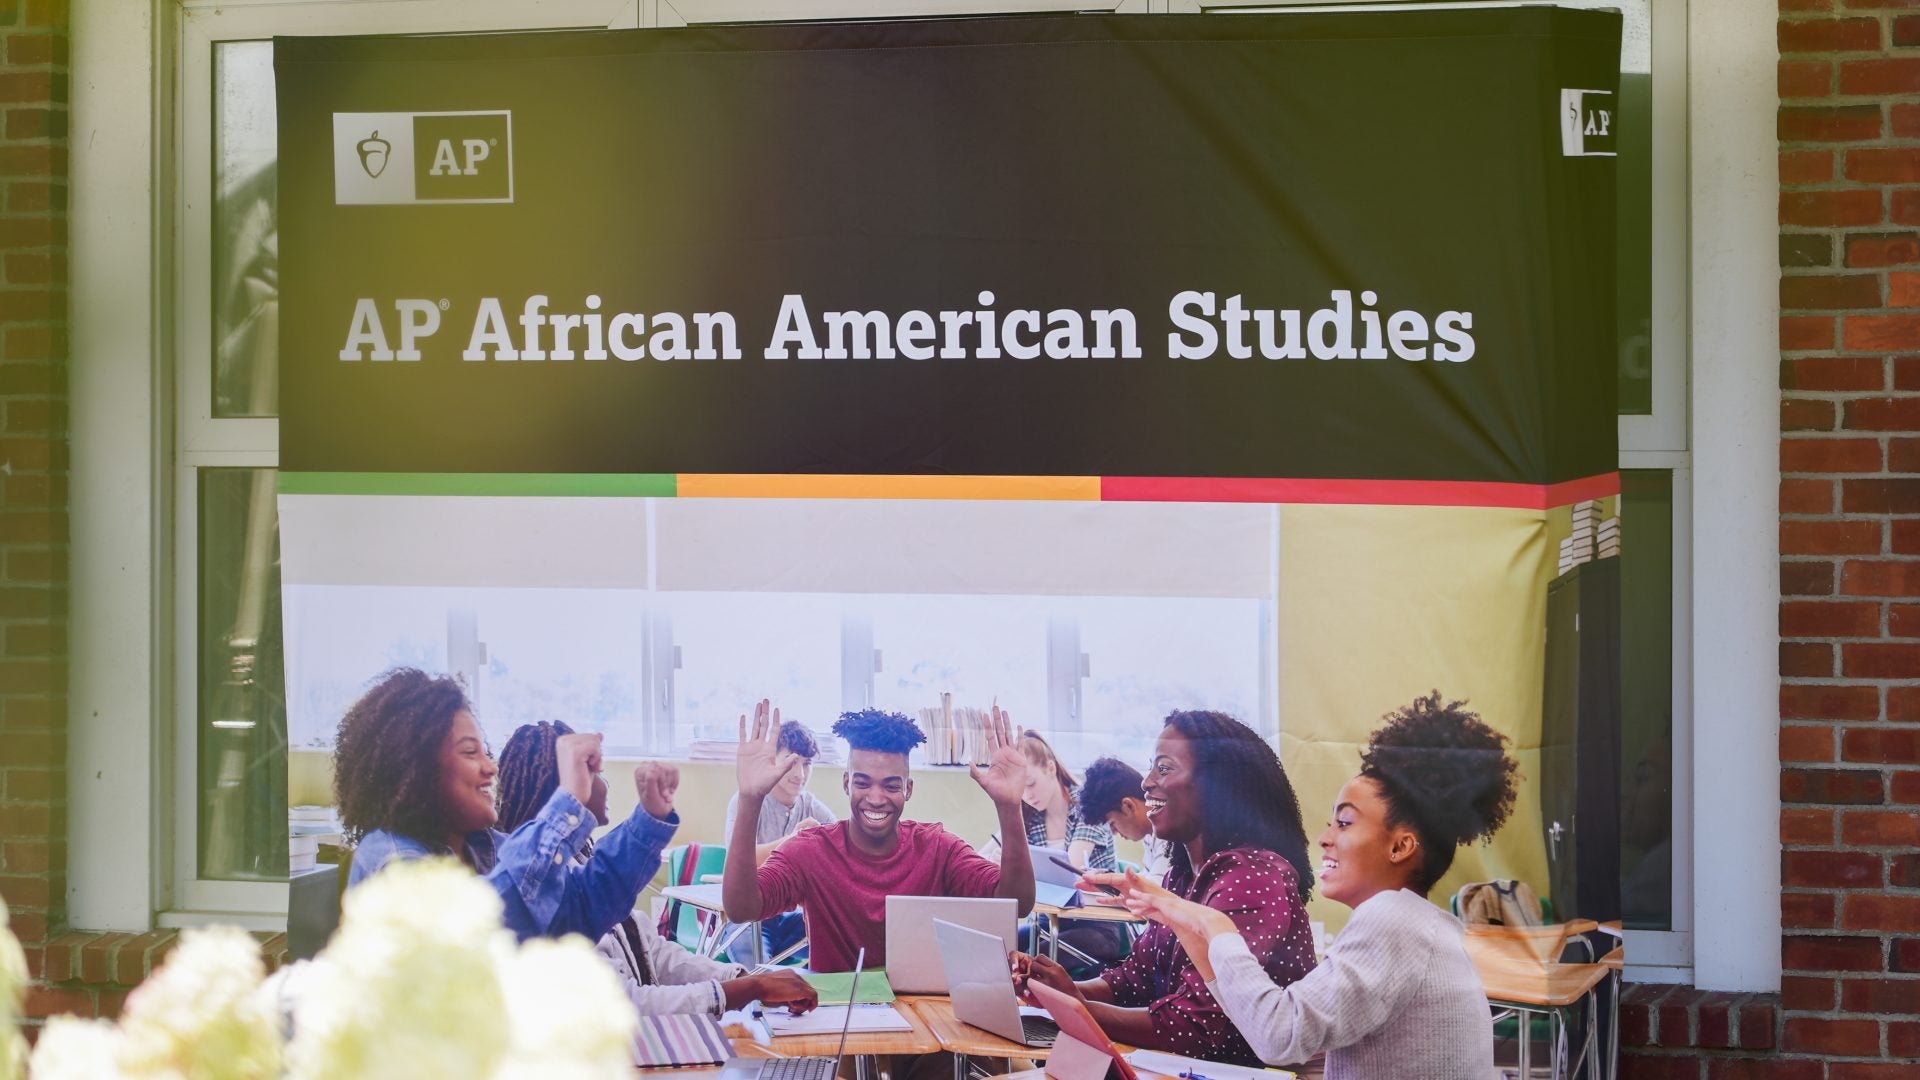 Georgia Prohibited State Funding For AP Black Studies Courses. A Day Later Superintendent Reverses Decision